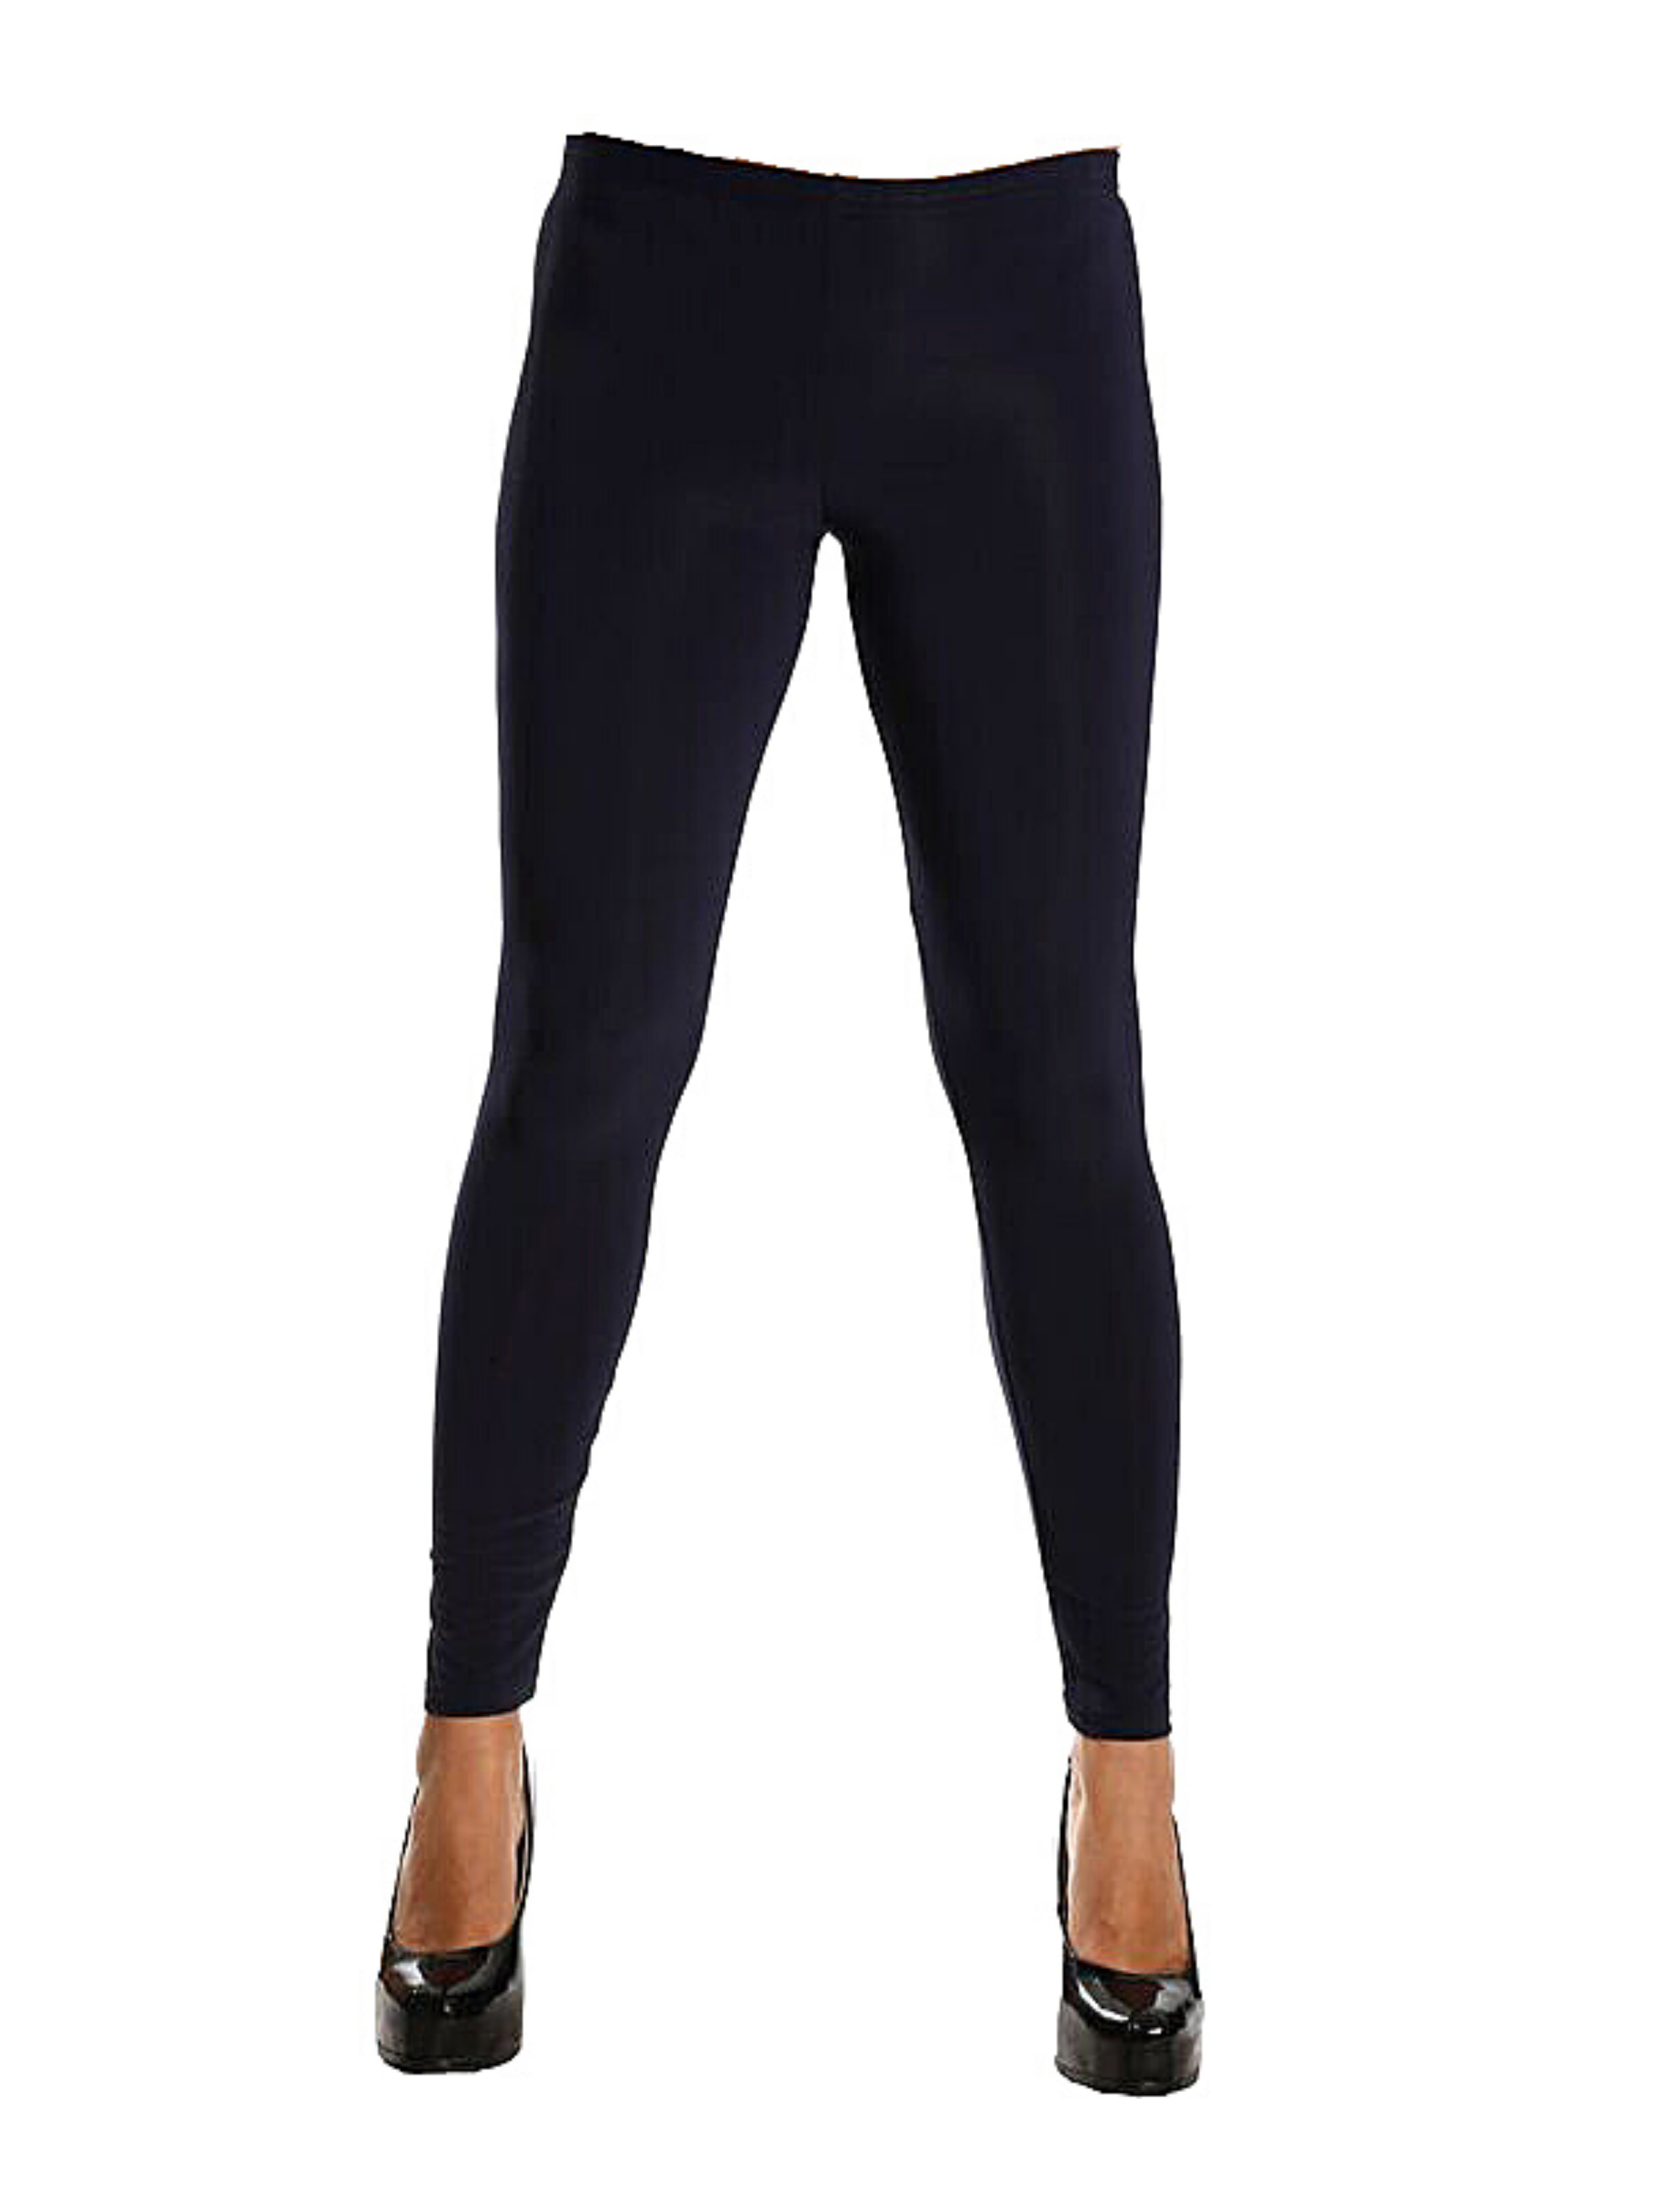 FASHQUE - Pull-On Ankle length legging - P027